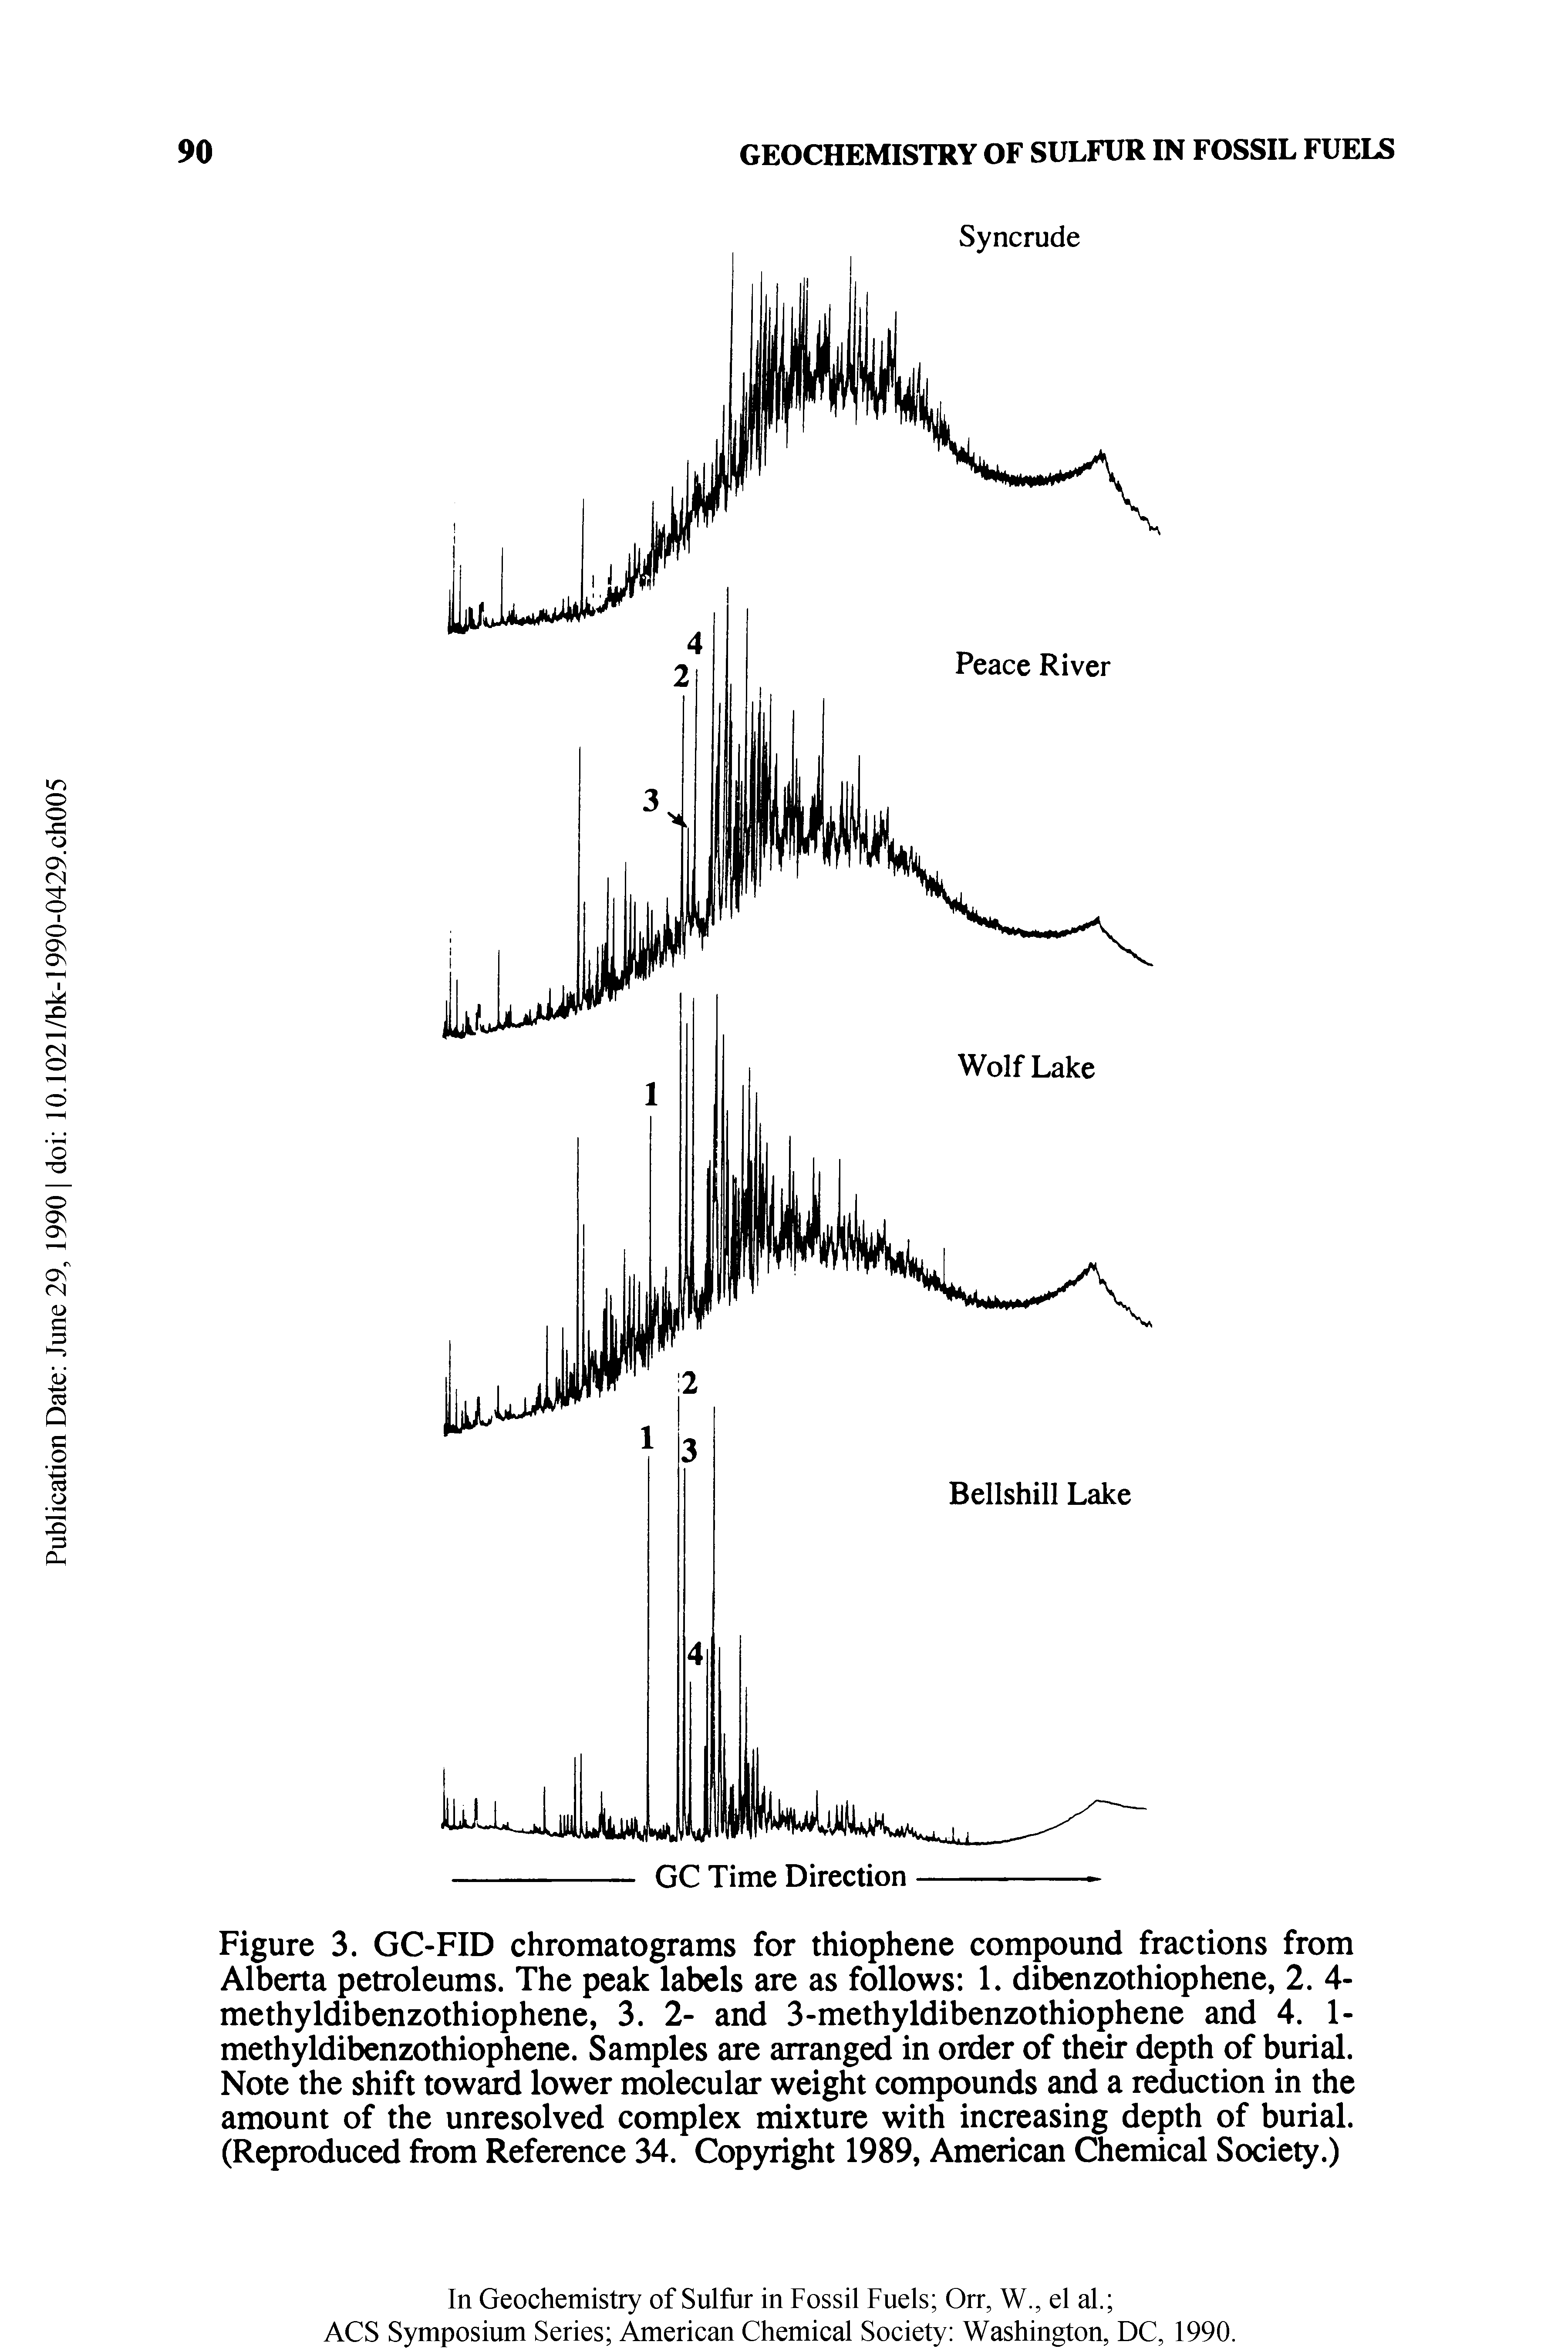 Figure 3. GC-FID chromatograms for thiophene compound fractions from Alberta petroleums. The peak labels are as follows 1. dibenzothiophene, 2. 4-methyldibenzothiophene, 3. 2- and 3-methyldibenzothiophene and 4. 1-methyldibenzothiophene. Samples are arranged in order of their depth of burial. Note the shift toward lower molecular weight compounds and a reduction in the amount of the unresolved complex mixture with increasing depth of burial. (Reproduced from Reference 34. Copyright 1989, American Chemical Society.)...